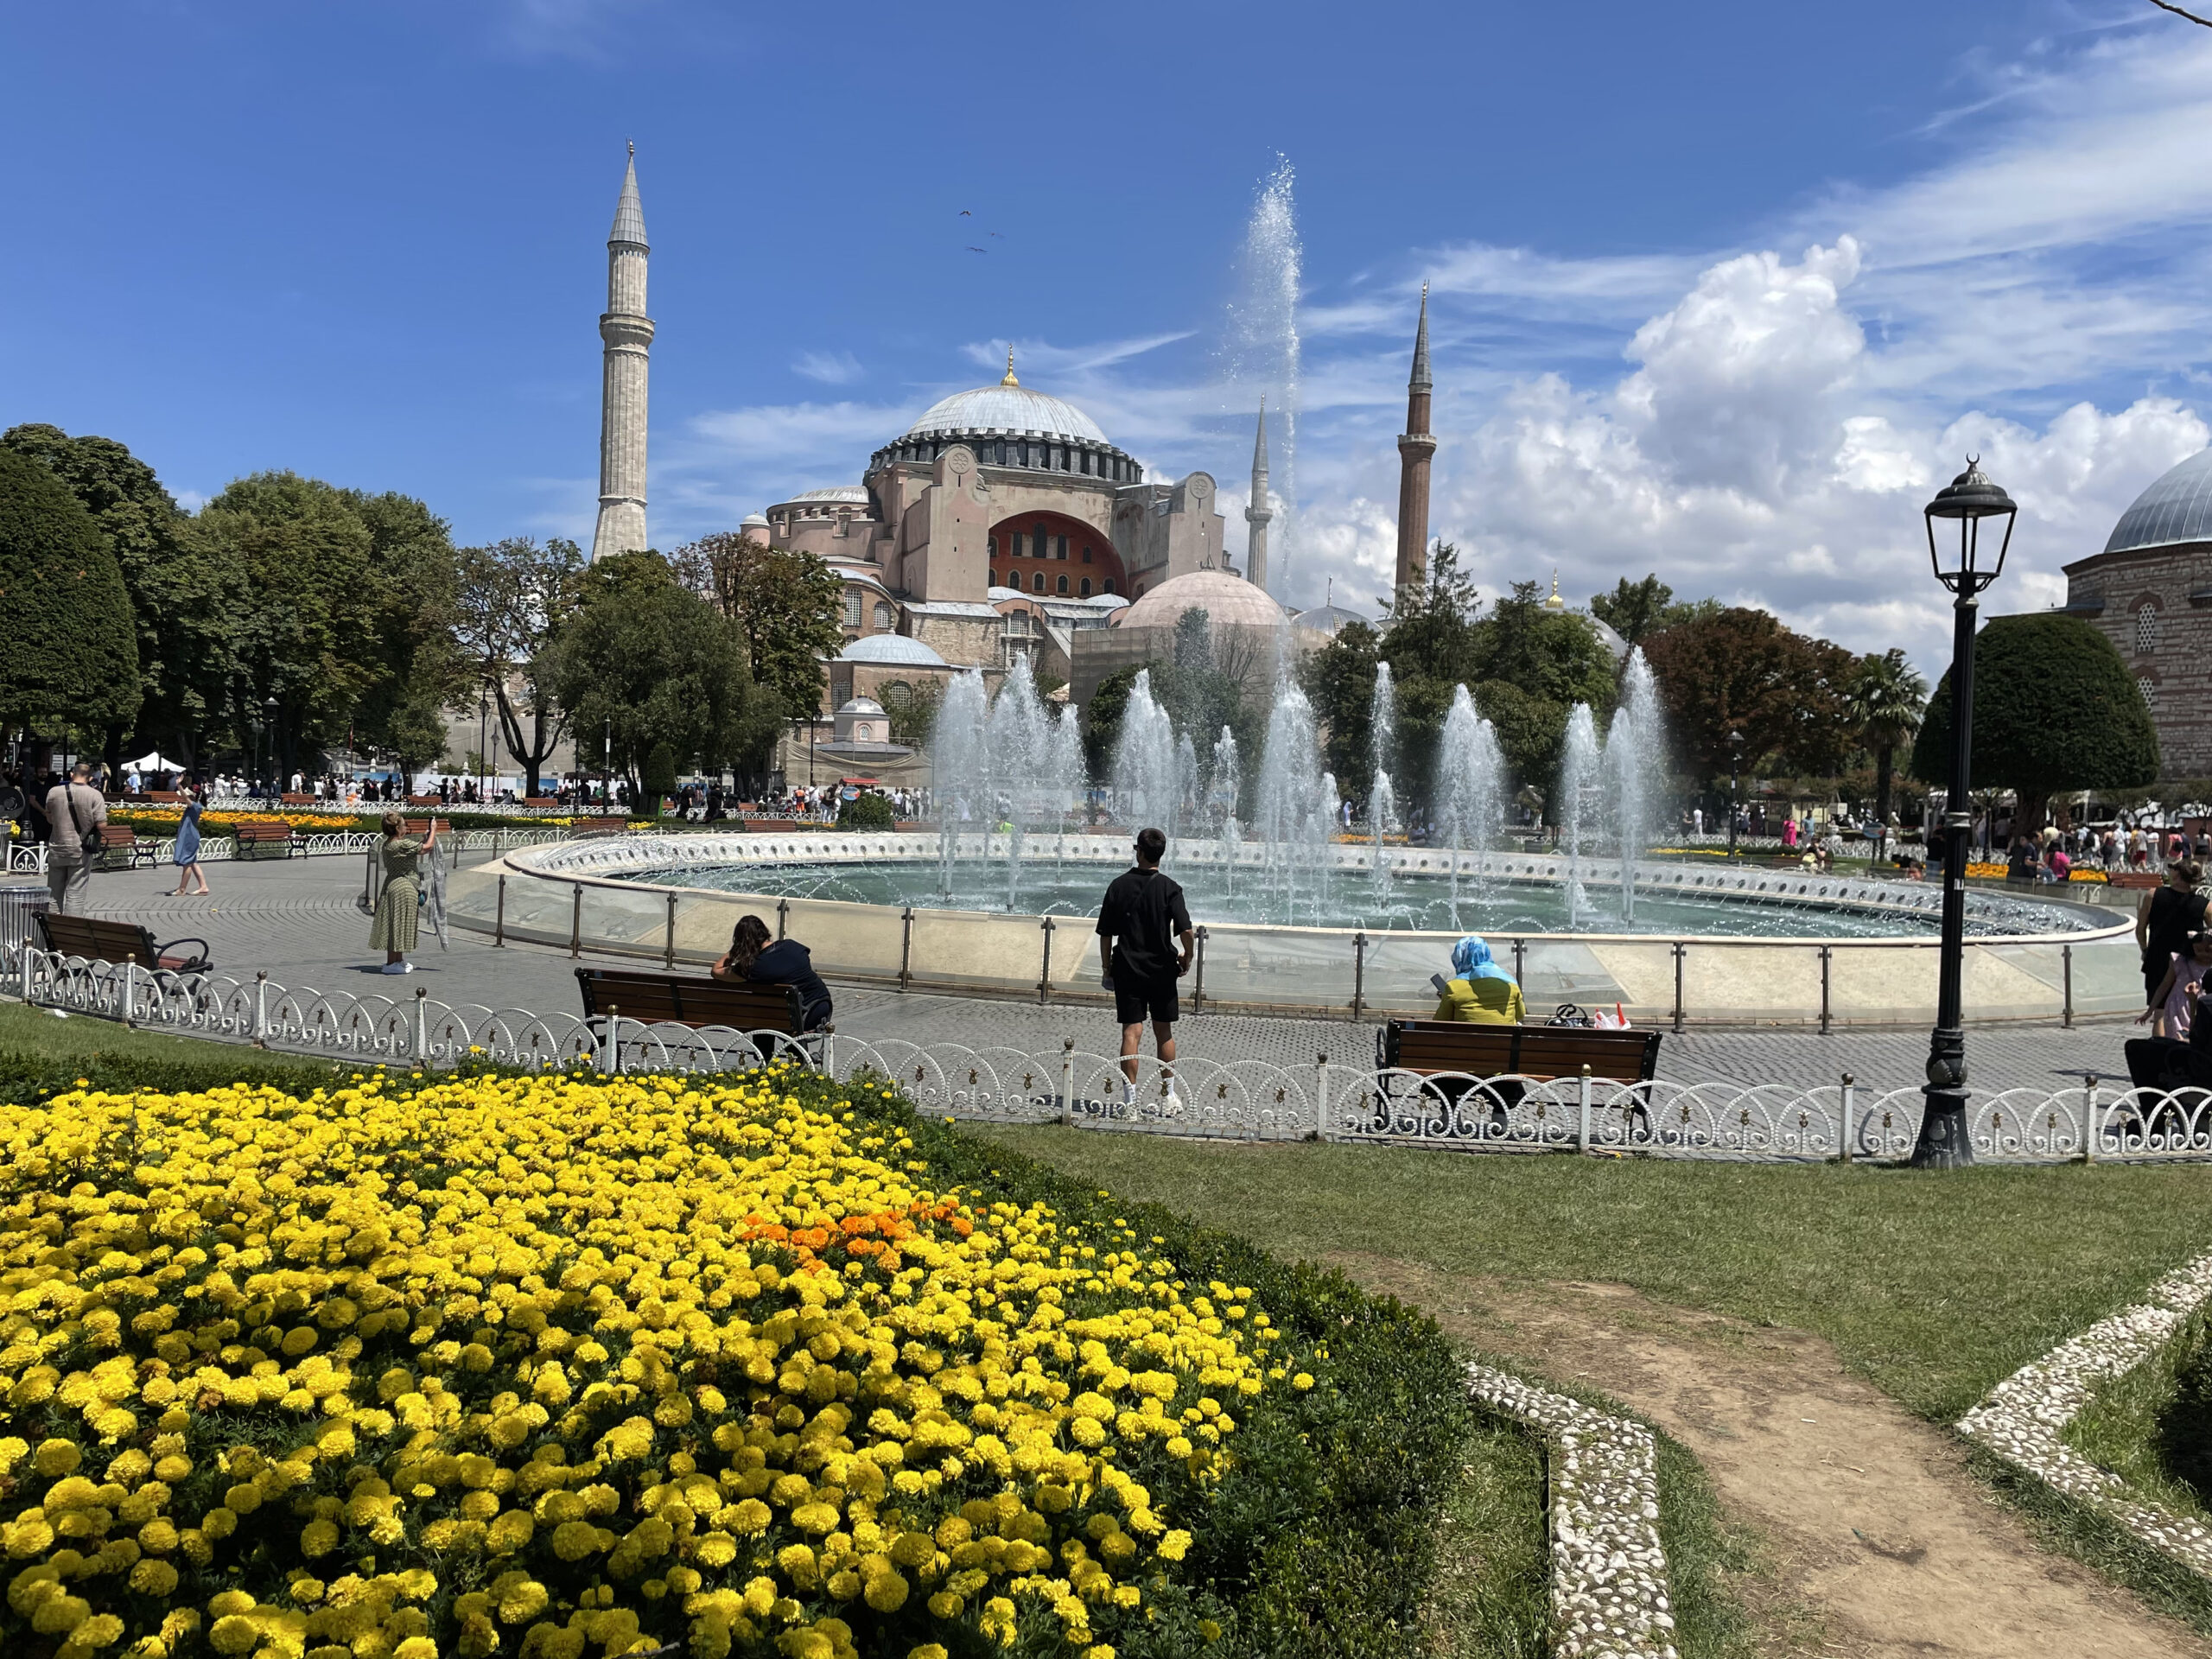 Istanbul: Things to do, Transportation, Galatasaray, Flash Invaders